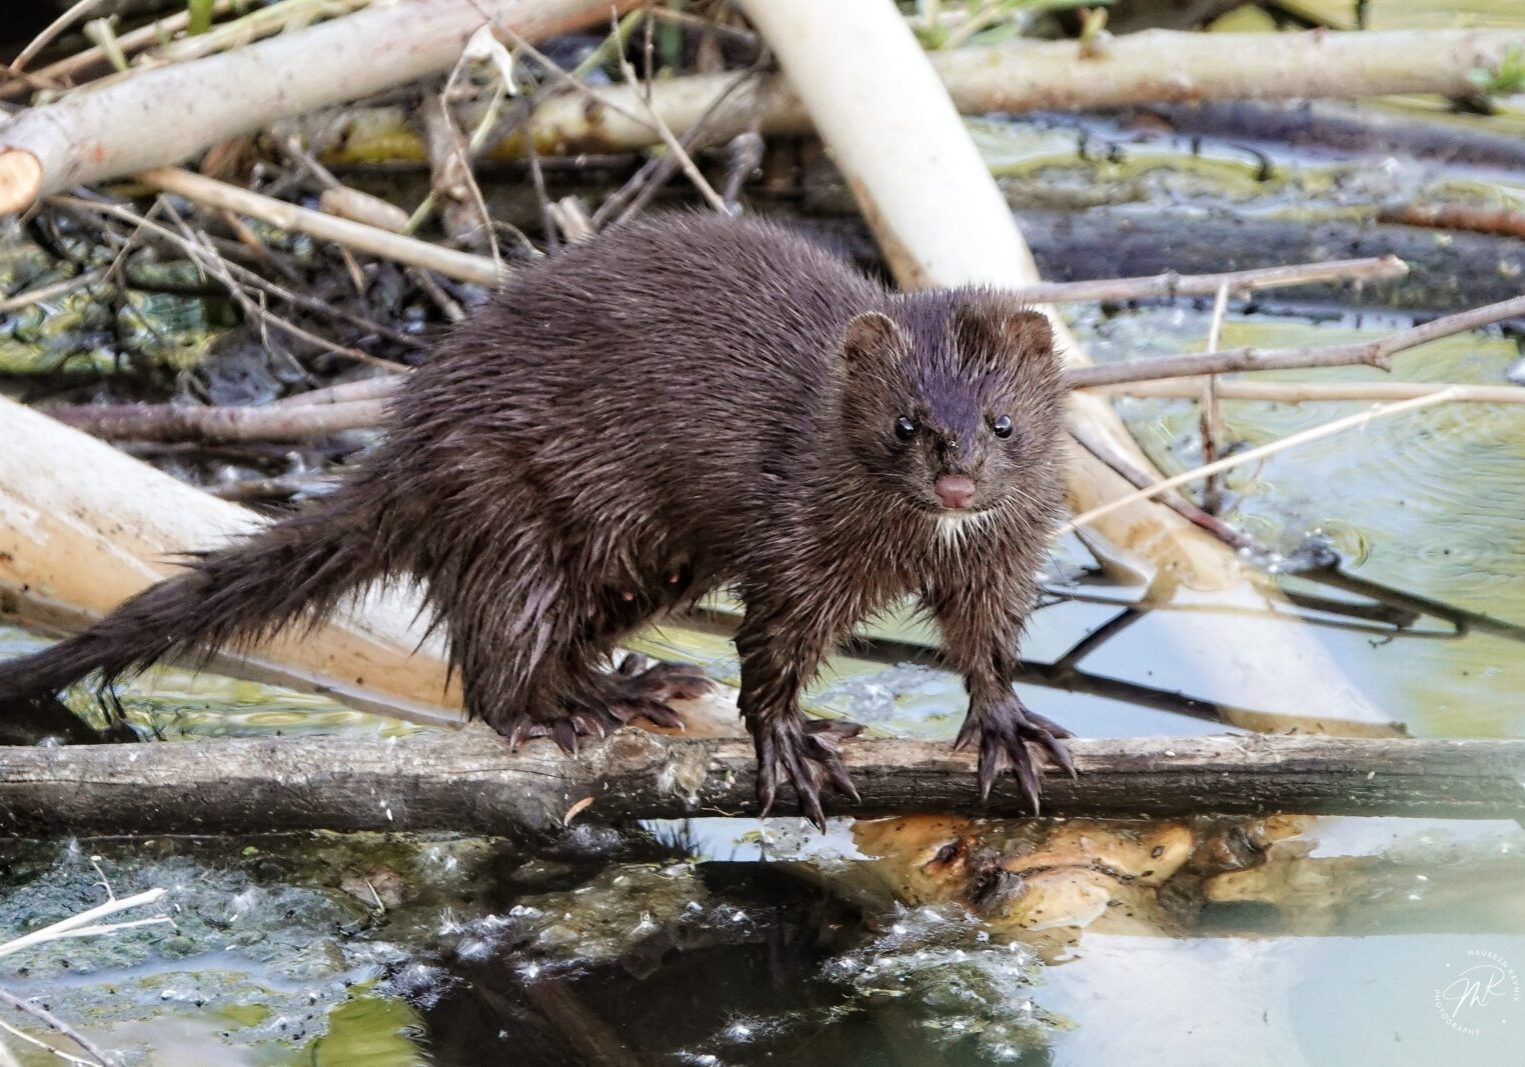 Rare sighting in 2022 of an American Mink in South Platte Park.
Photo by Maureen Ravnik